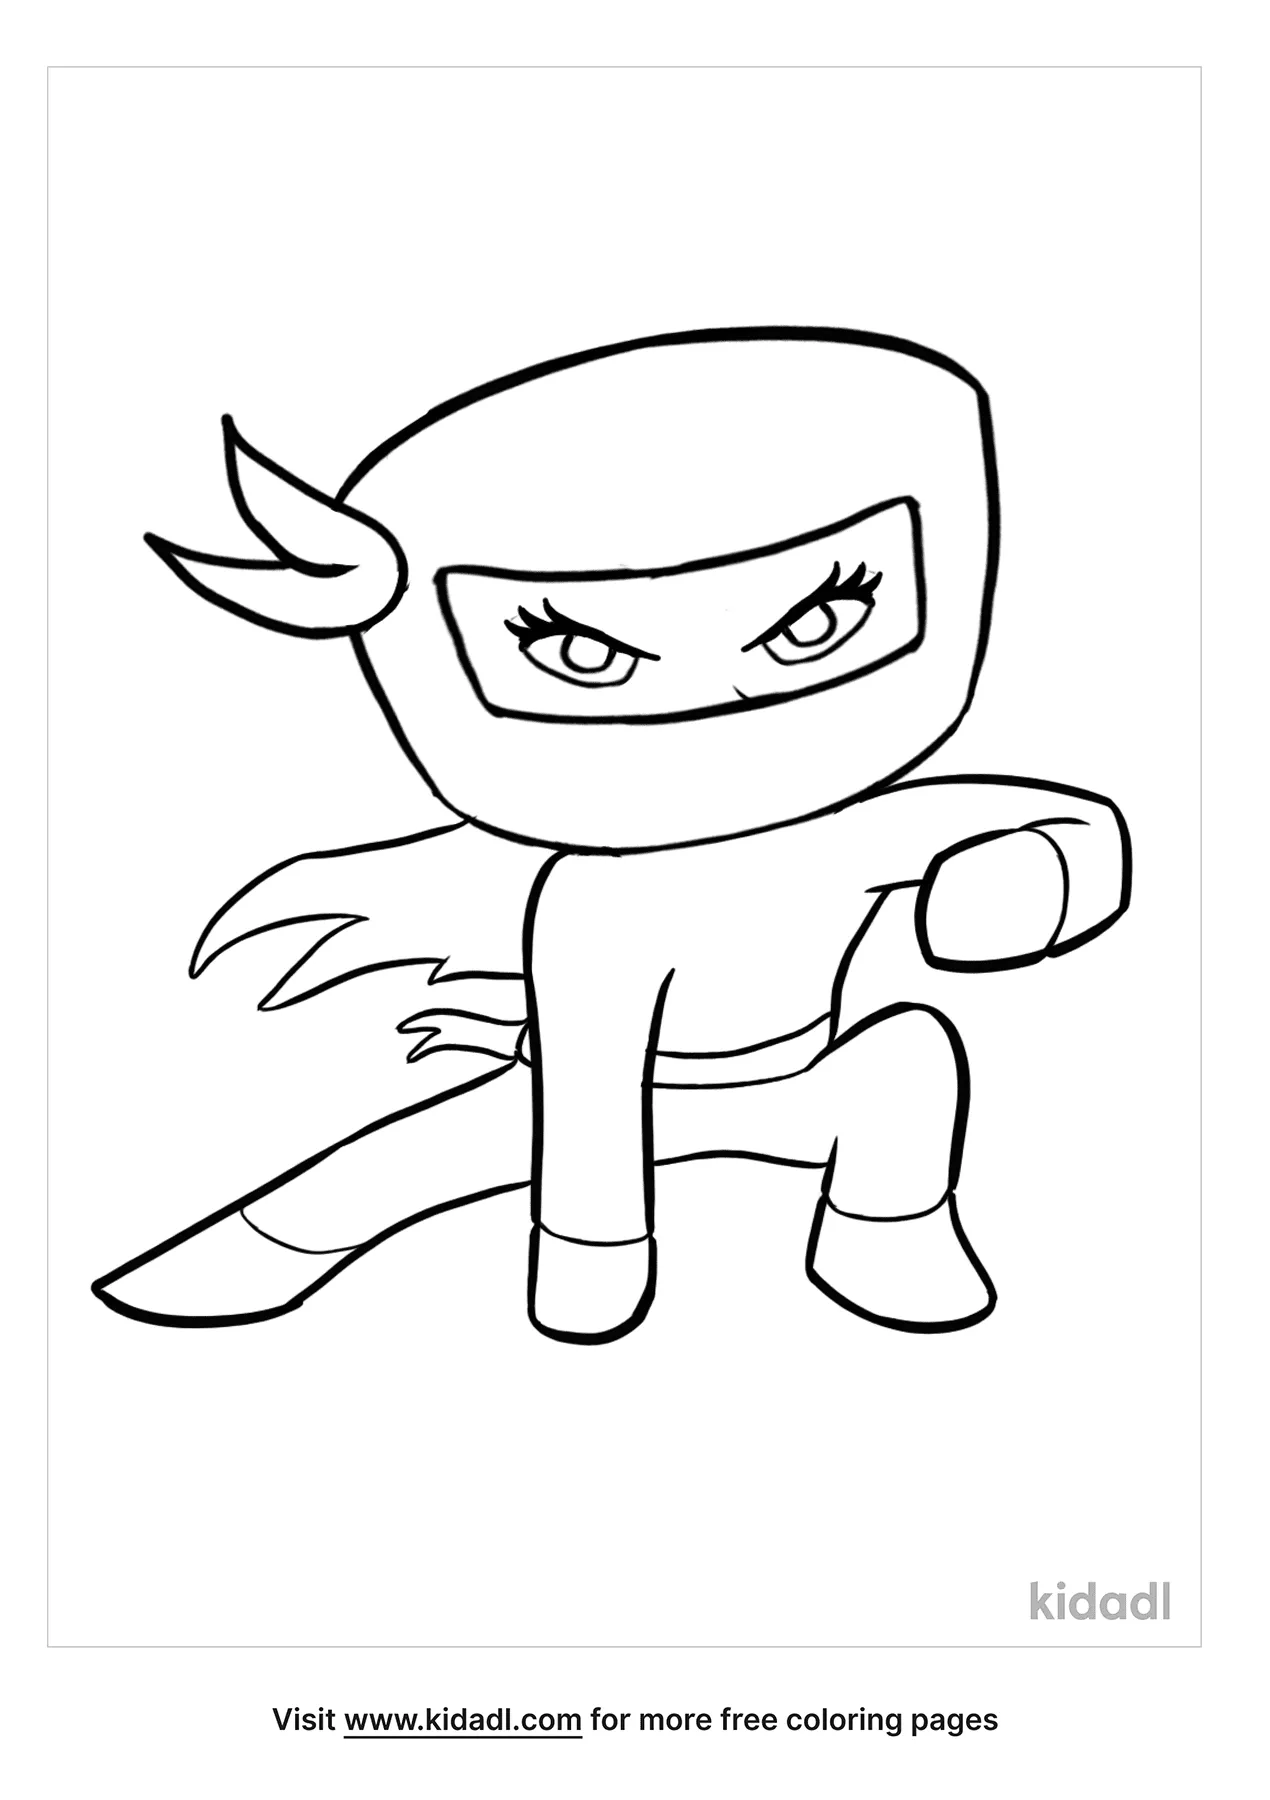 Ninja Coloring Pages   Free People and celebrities Coloring Pages ...